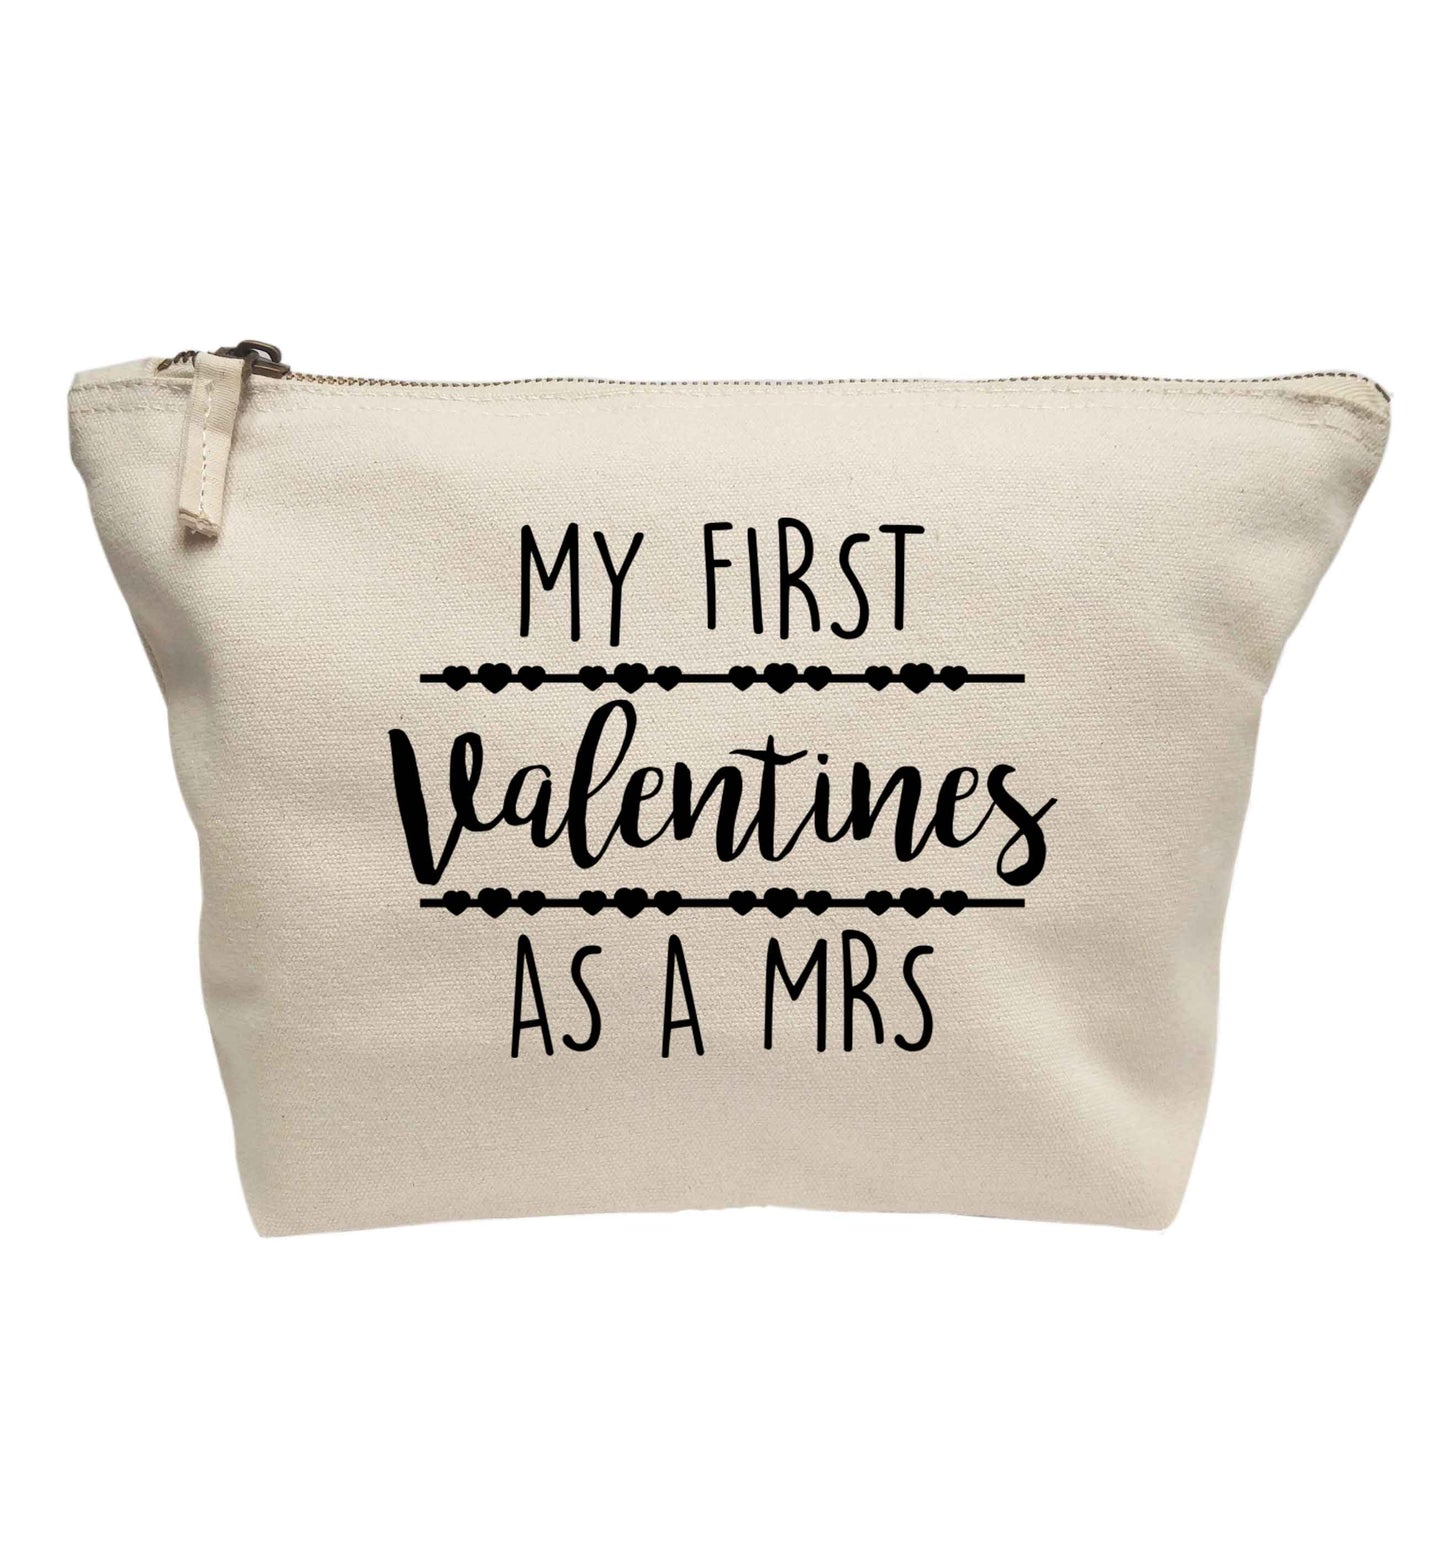 My first valentines as a Mrs | Makeup / wash bag